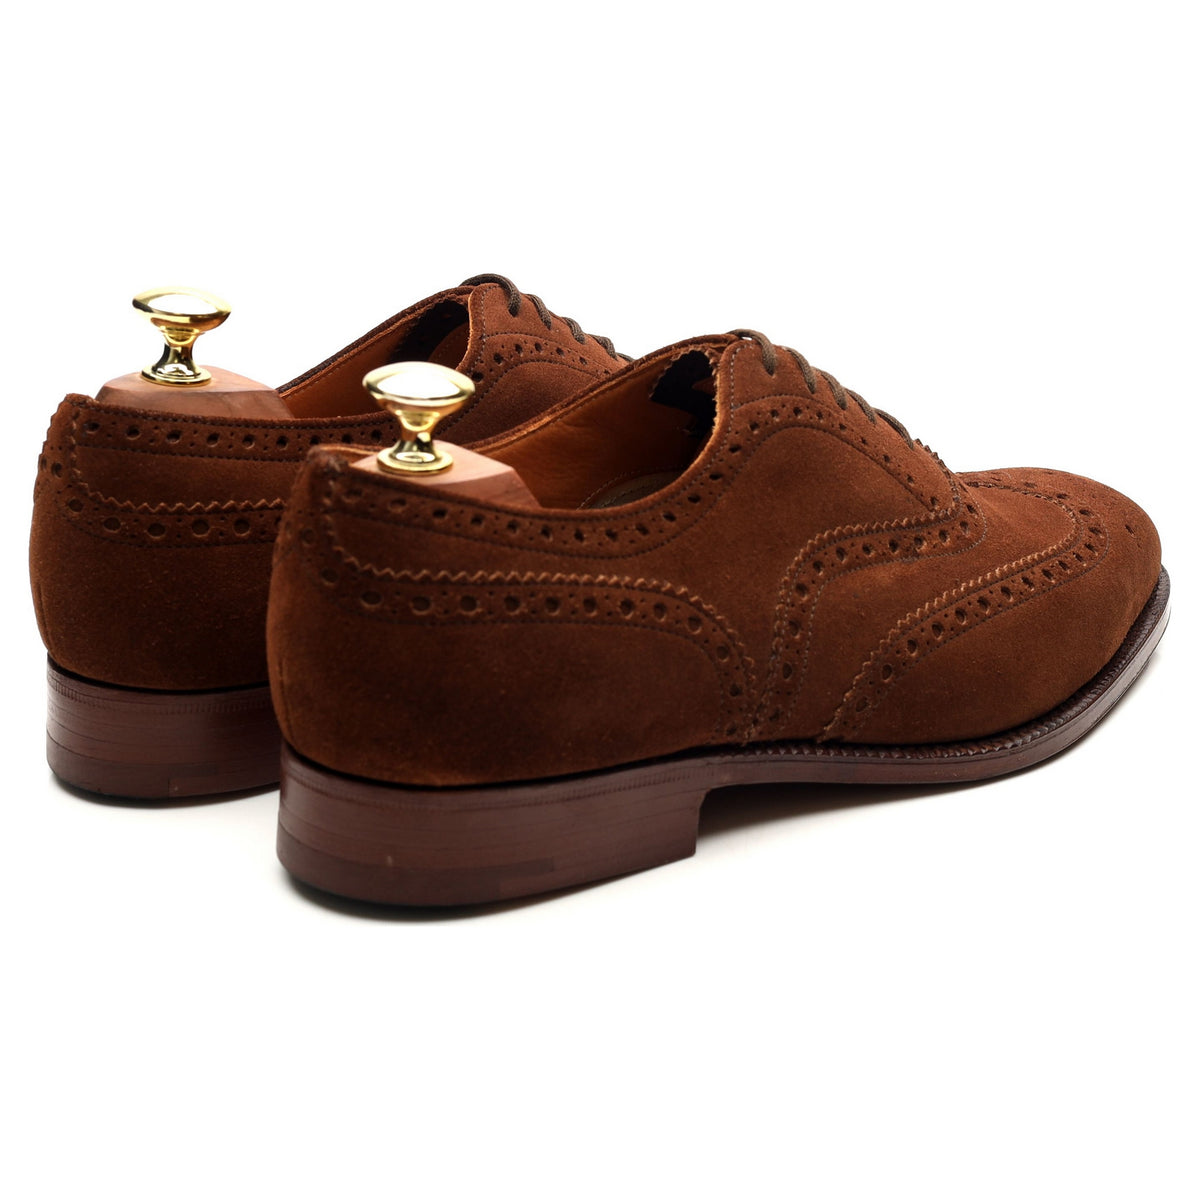 &#39;Chetwynd&#39; Snuff Brown Suede Brogues UK 7.5 G